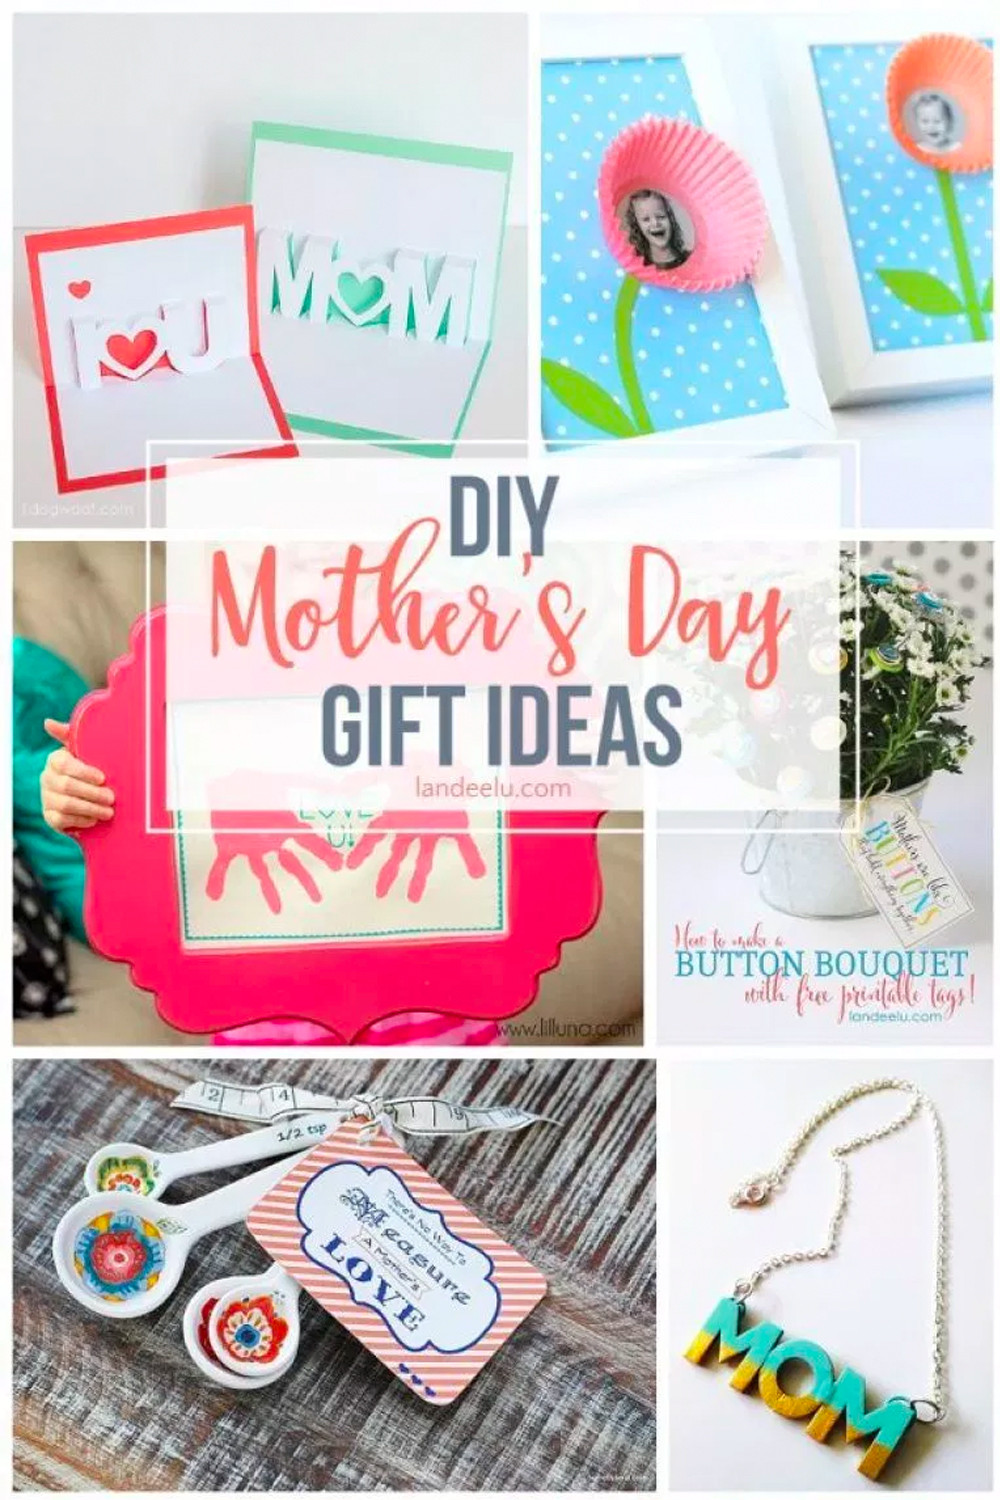 Mother'S Day Gift Ideas To Make At Home
 DIY Mothers Day Gift Ideas landeelu